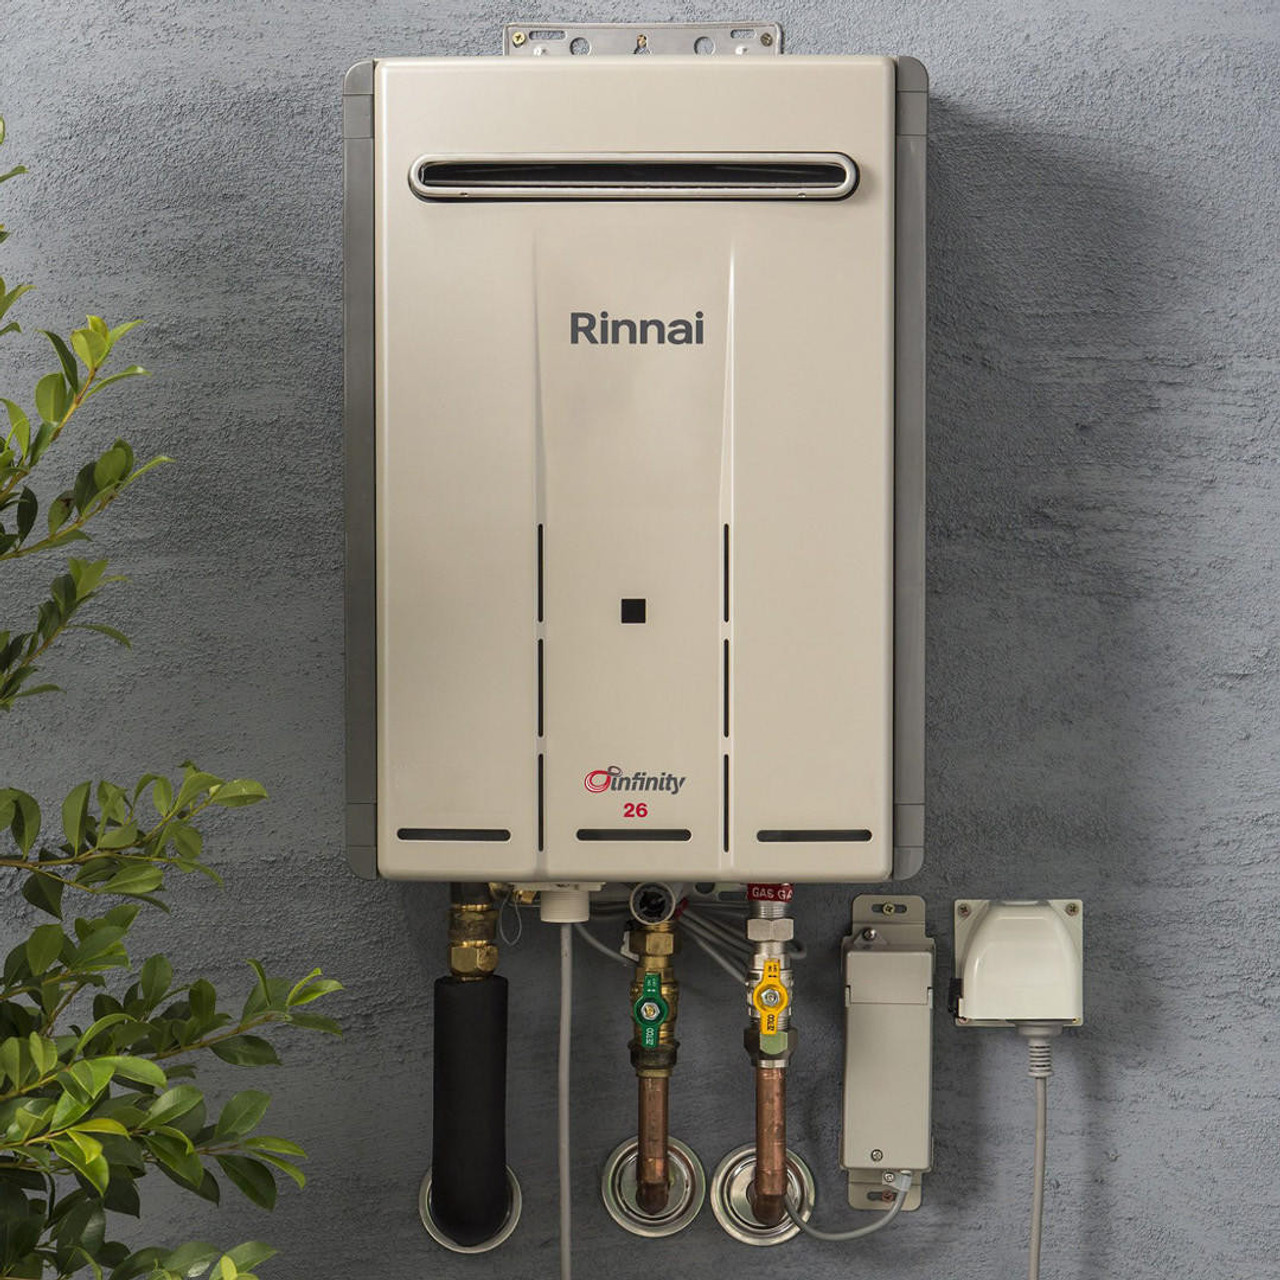 Rinnai Infinity 26 Touch Continuous Flow Gas Hot Water System Champagne Pearl